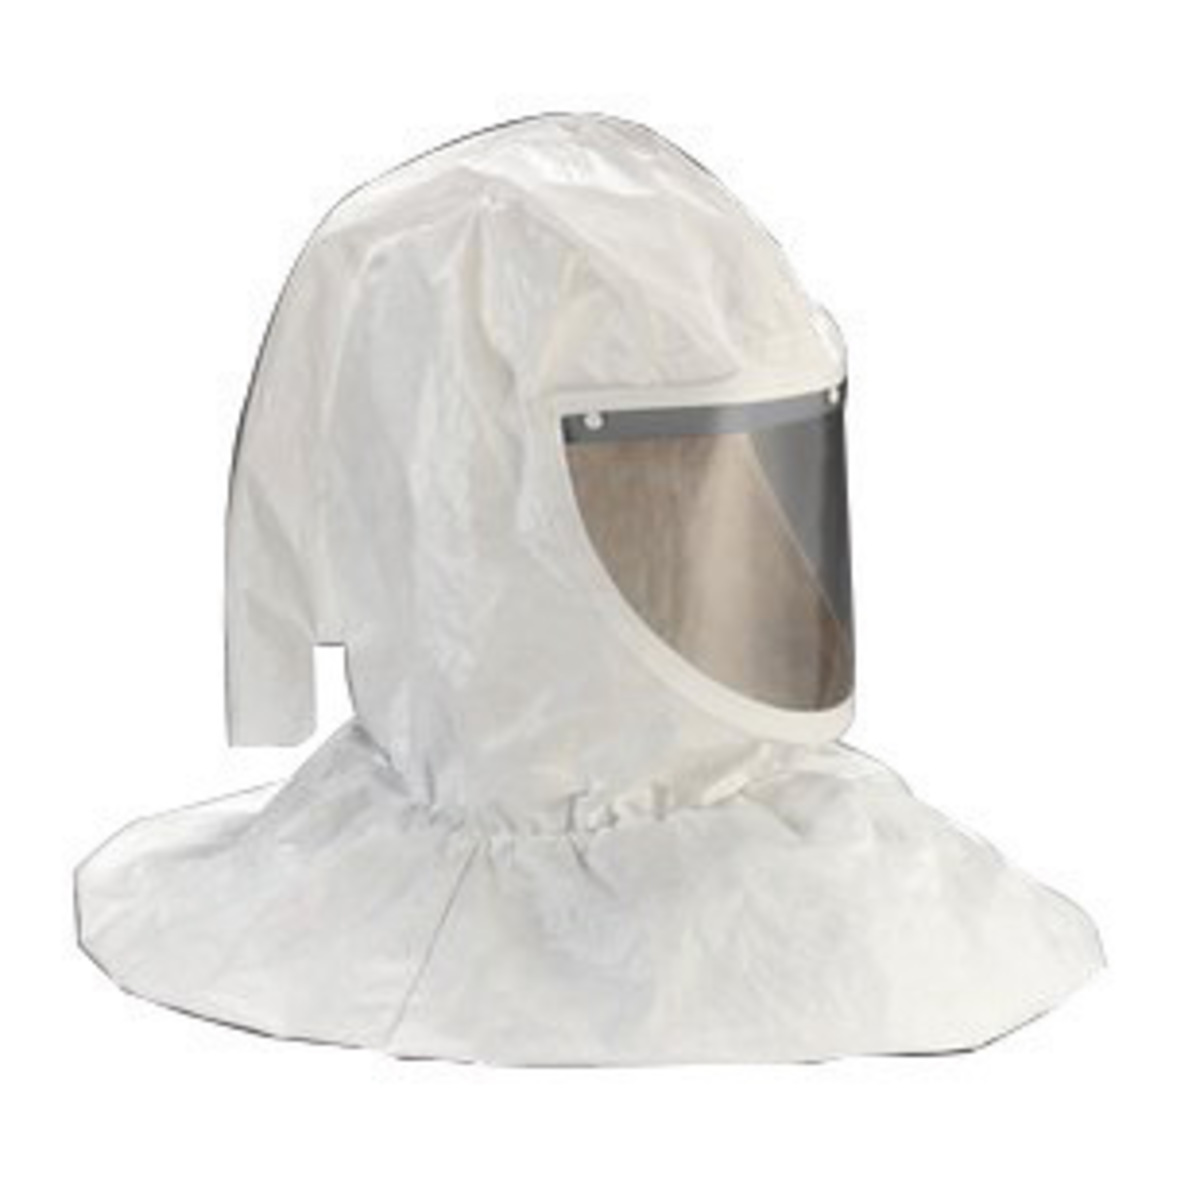 3M™ Standard Tychem® QC H-Series White Hood Assembly With Collar And Hard Hat (Includes (2) Hood, (2) Faceshield Cover, (1) Hats